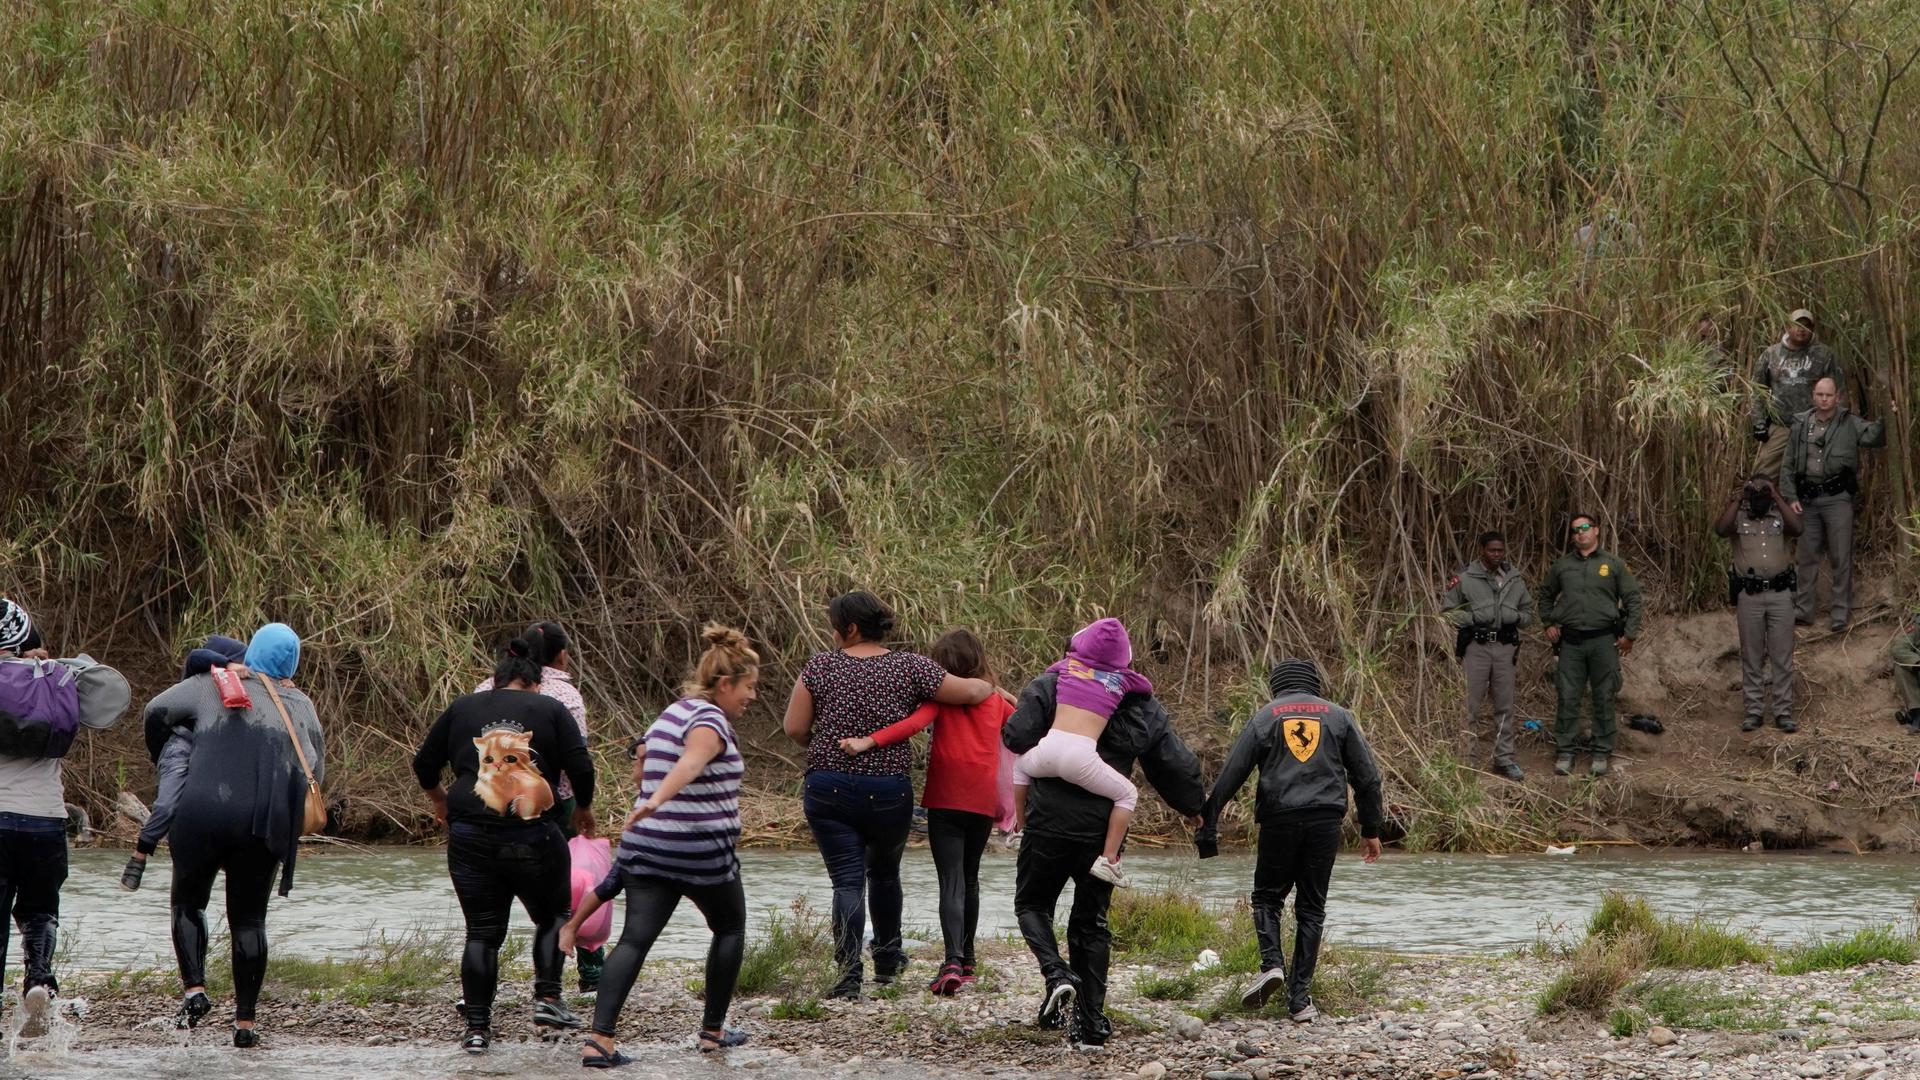 A group of migrants cross a shallow river and met with border agents in green uniforms.